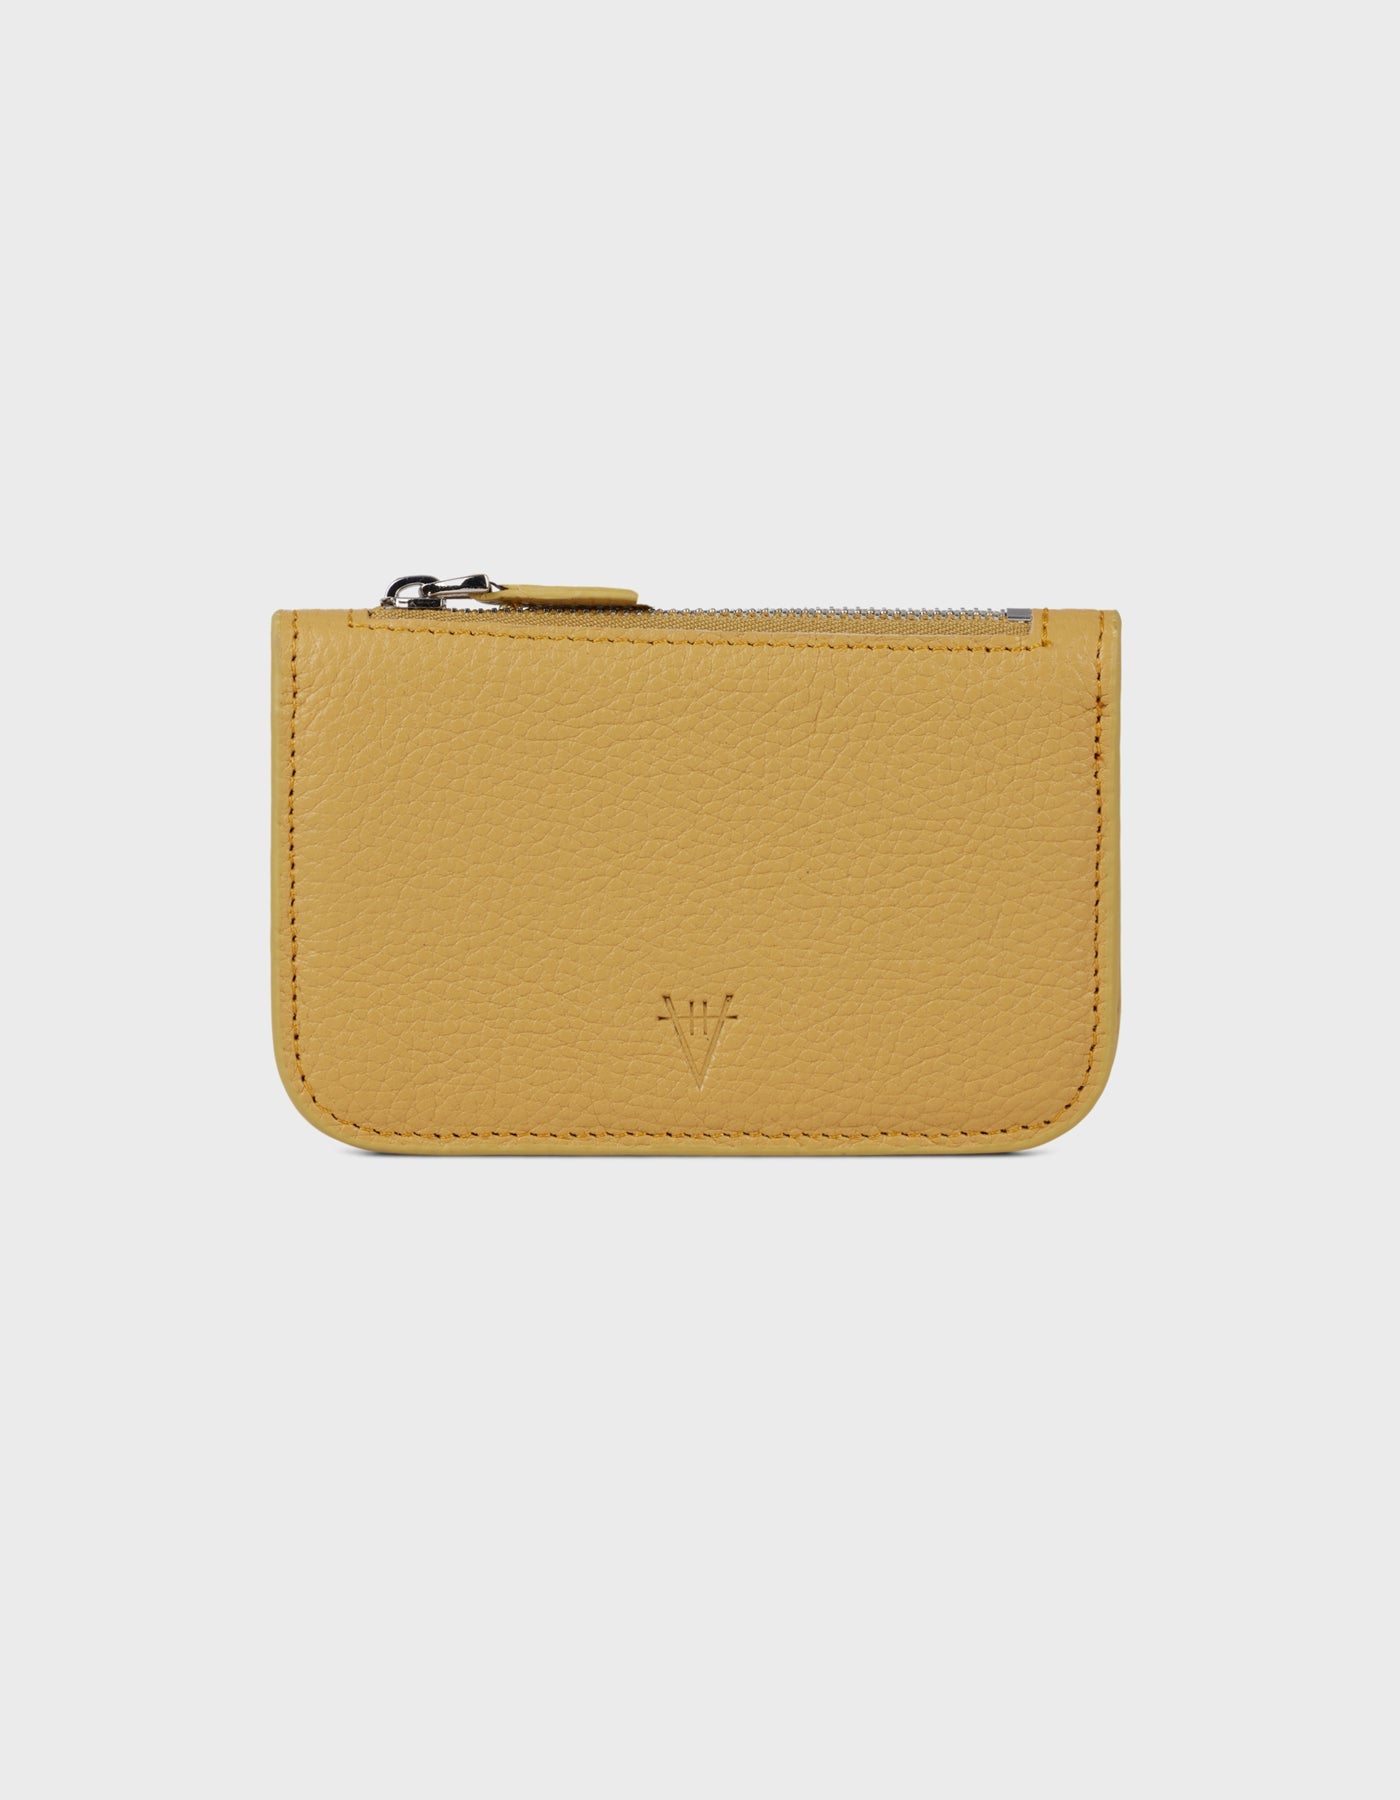 Alae Coin Purse & Card Holder - Finest Quality HiVa Atelier GmbH Leather Accessories